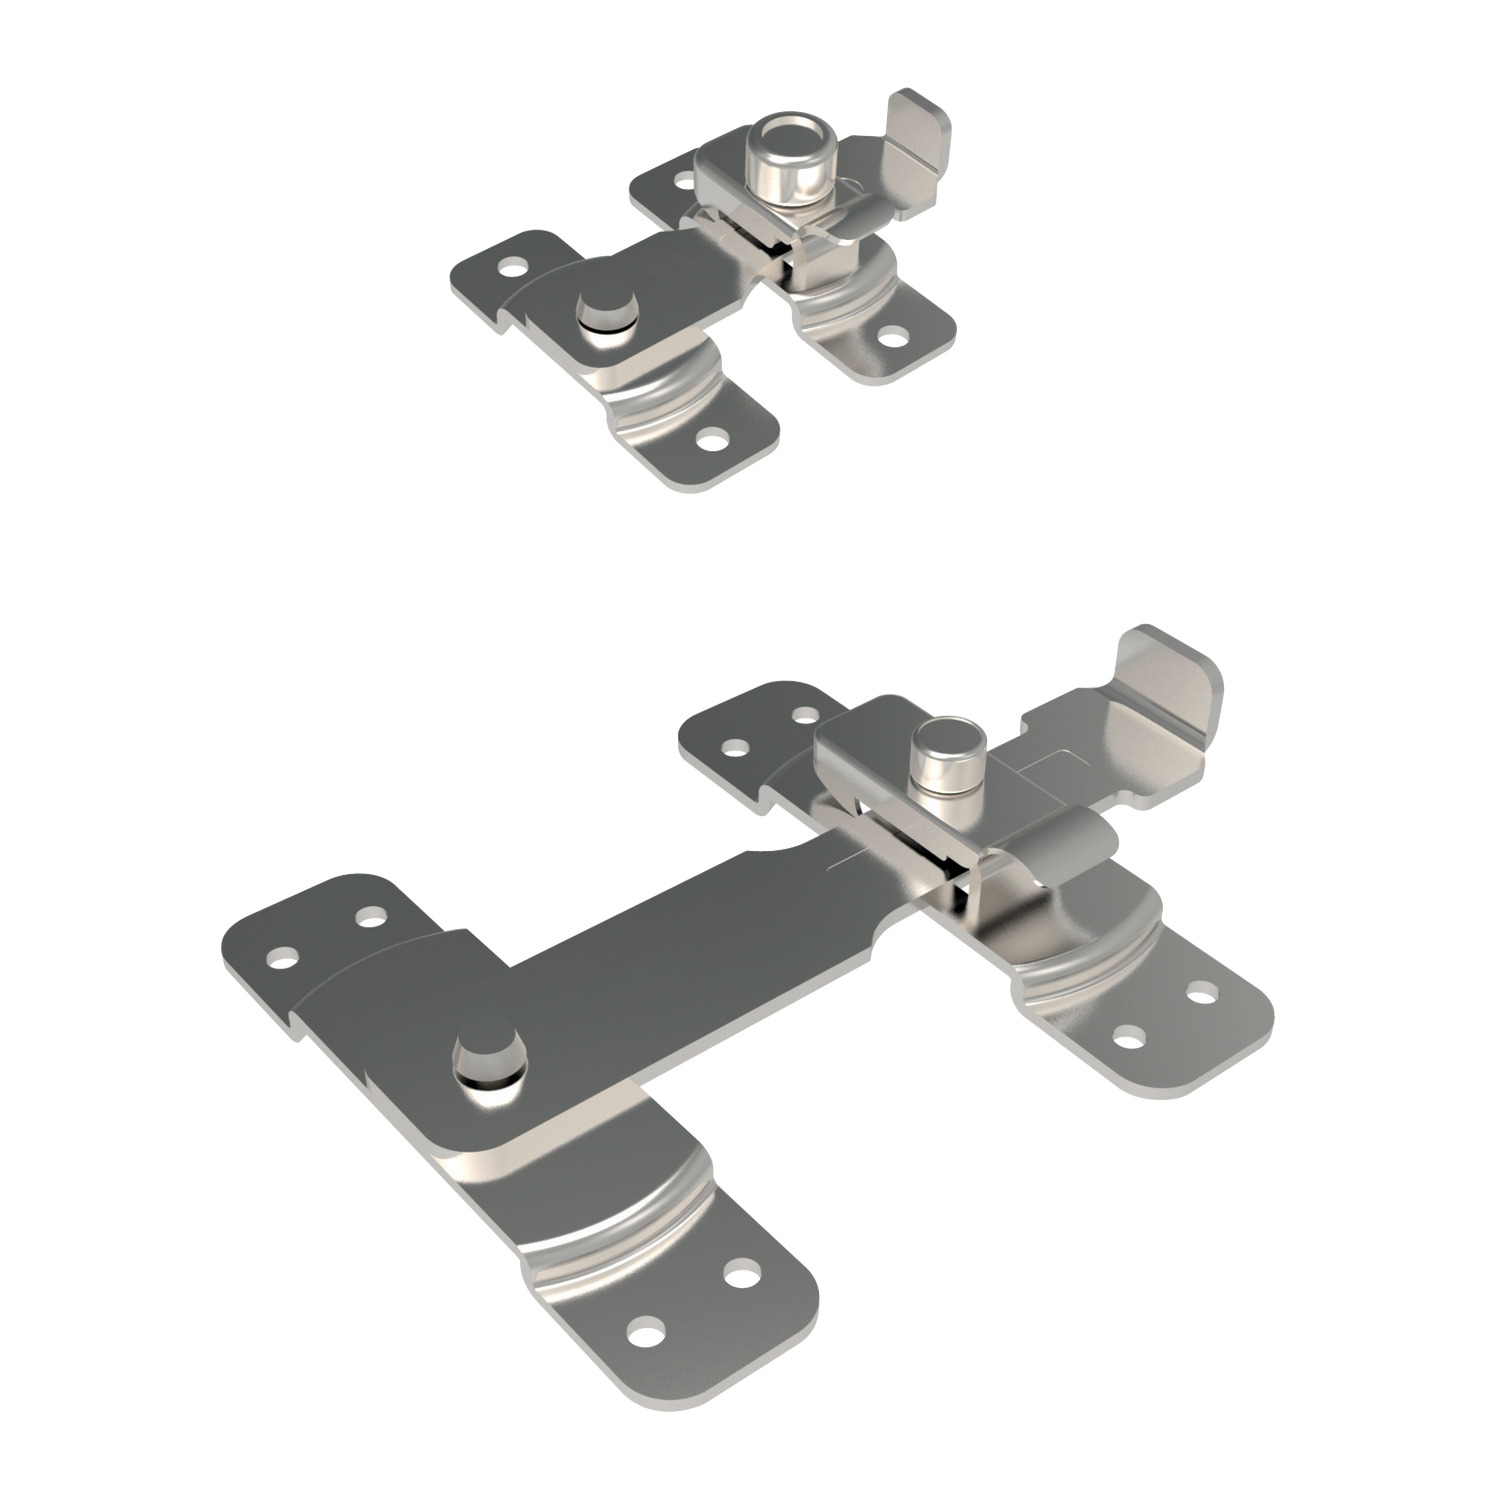 J6240.AC0060 Bar Latches Stainless Steel Spring loaded. 63 x 46